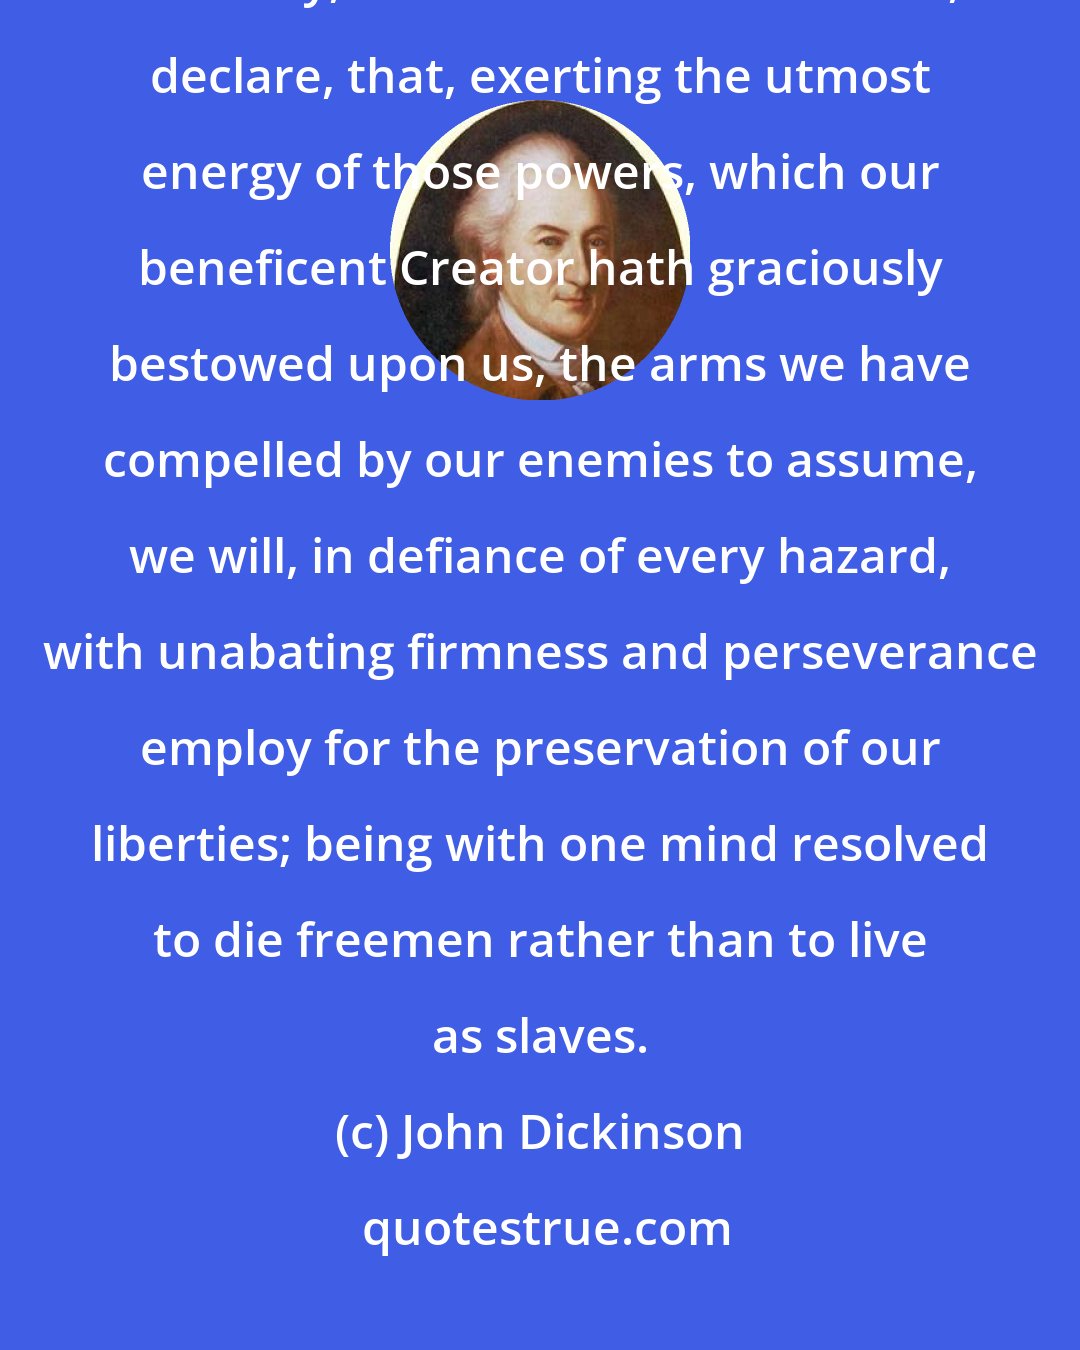 John Dickinson: With hearts fortified with these animating reflections, we most solemnly, before God and the world, declare, that, exerting the utmost energy of those powers, which our beneficent Creator hath graciously bestowed upon us, the arms we have compelled by our enemies to assume, we will, in defiance of every hazard, with unabating firmness and perseverance employ for the preservation of our liberties; being with one mind resolved to die freemen rather than to live as slaves.